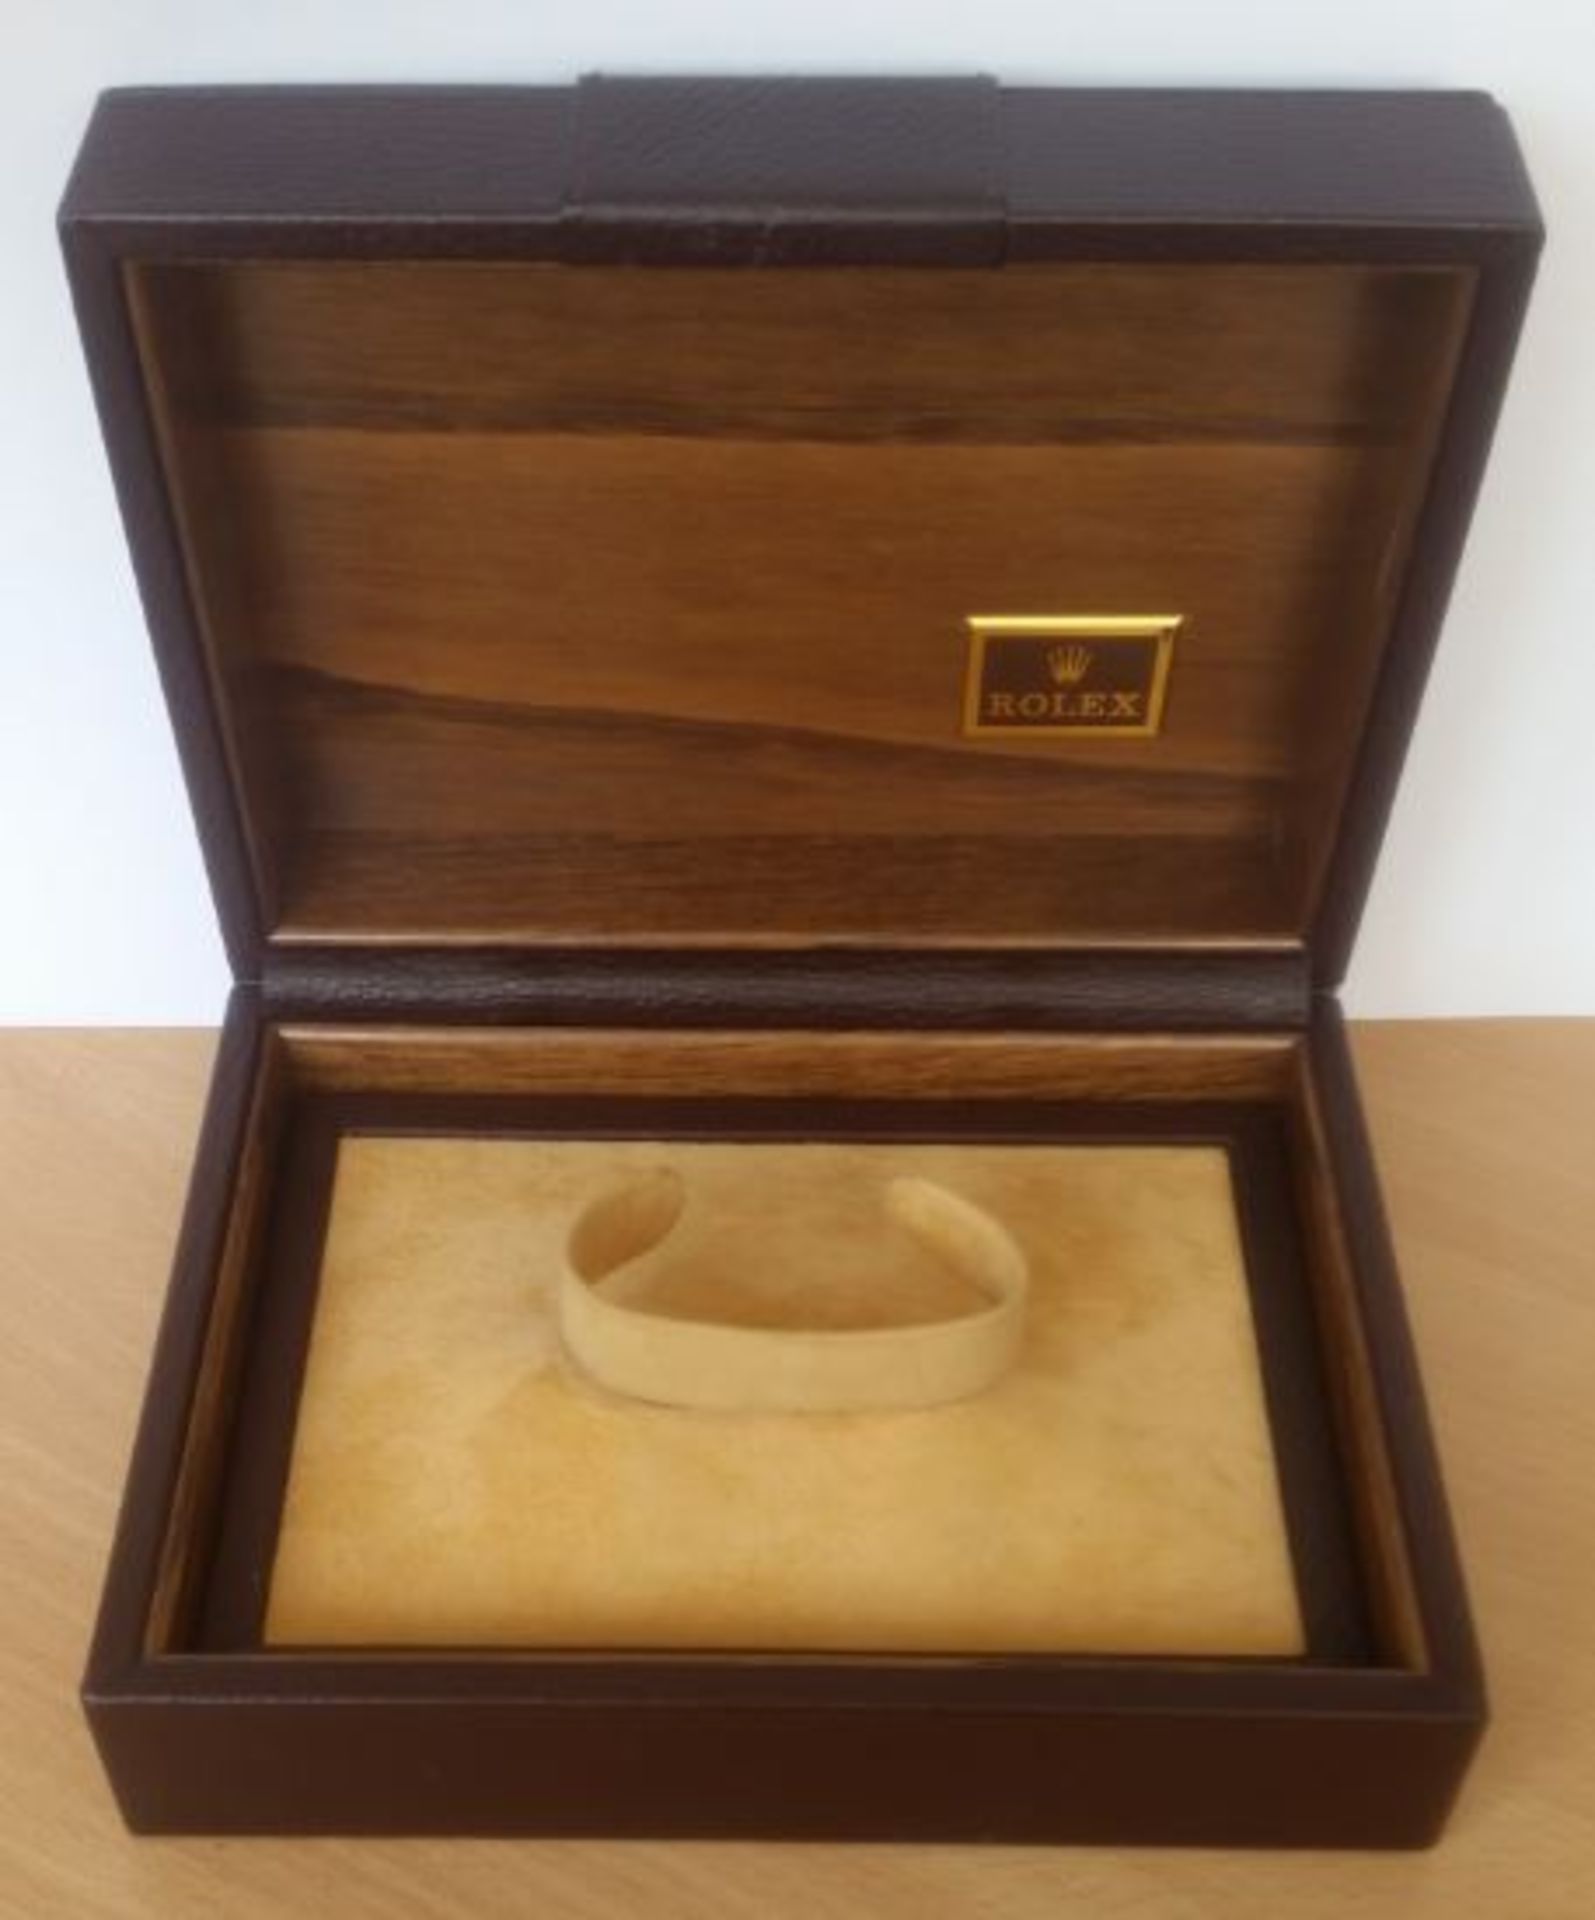 Rolex Brown Leather Presentation Watch Box - Image 3 of 4